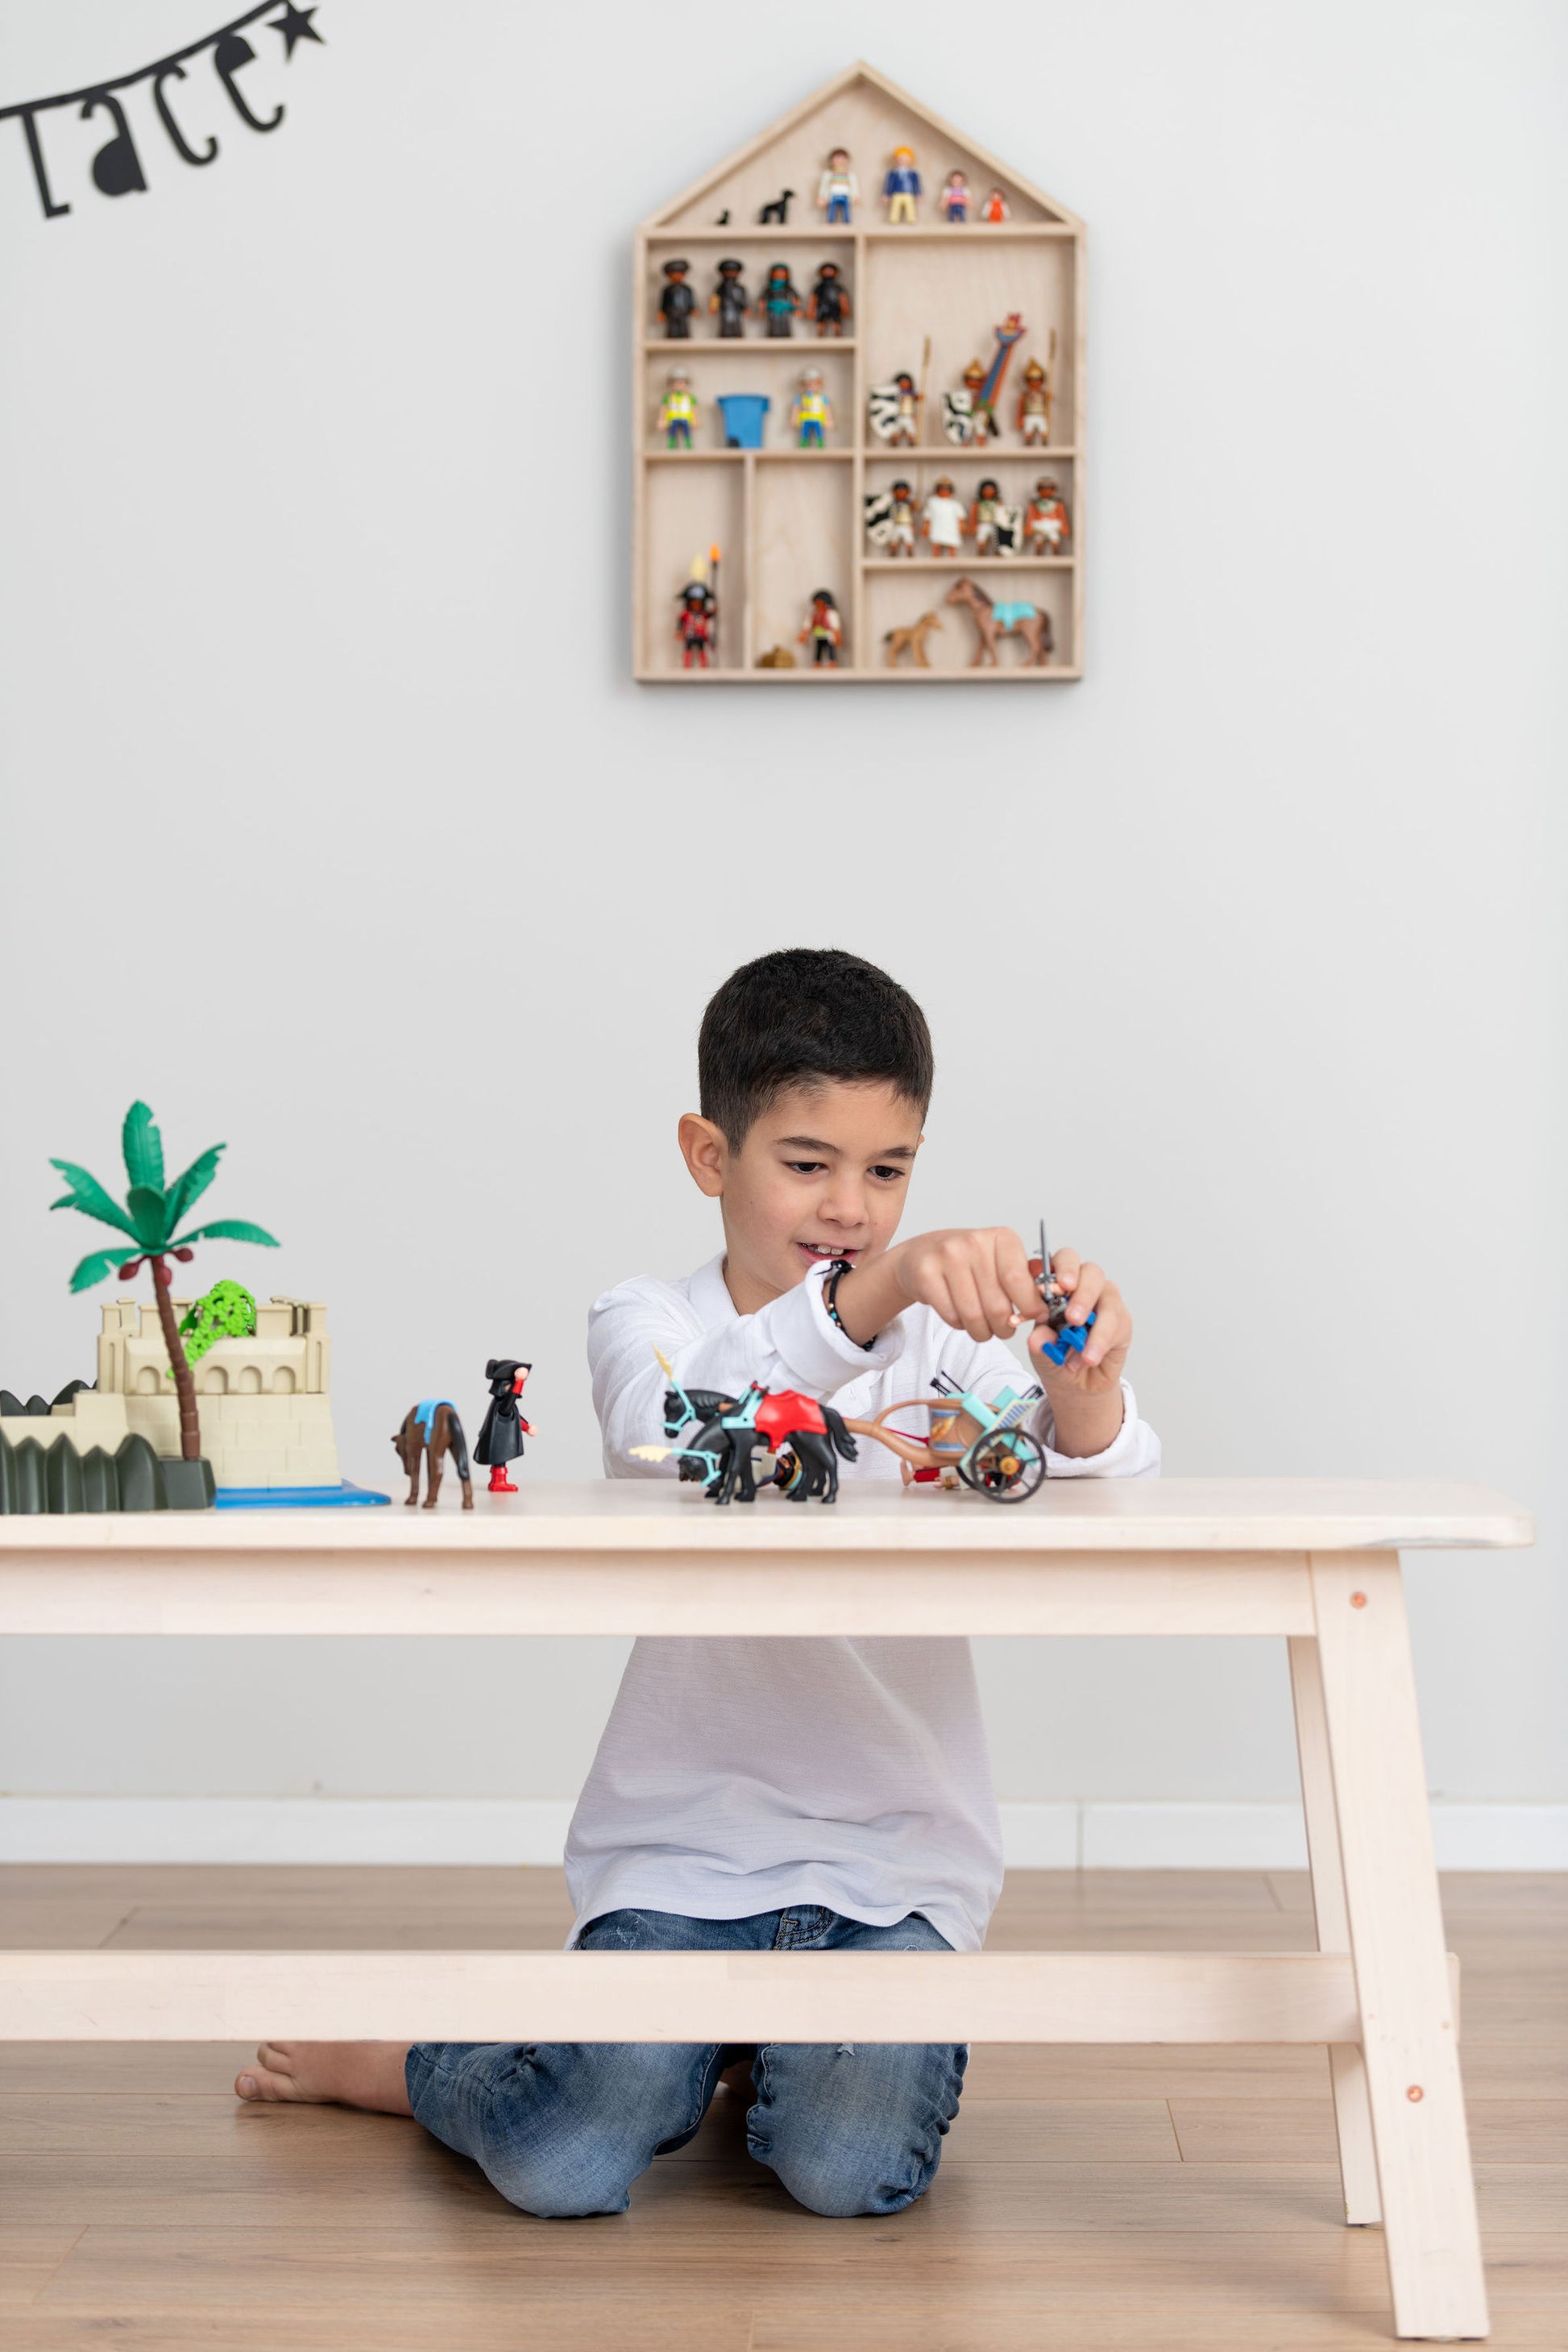 A sits near a bench and plays with Playmobil near a house-shaped toy display shelf that is hung on the wall